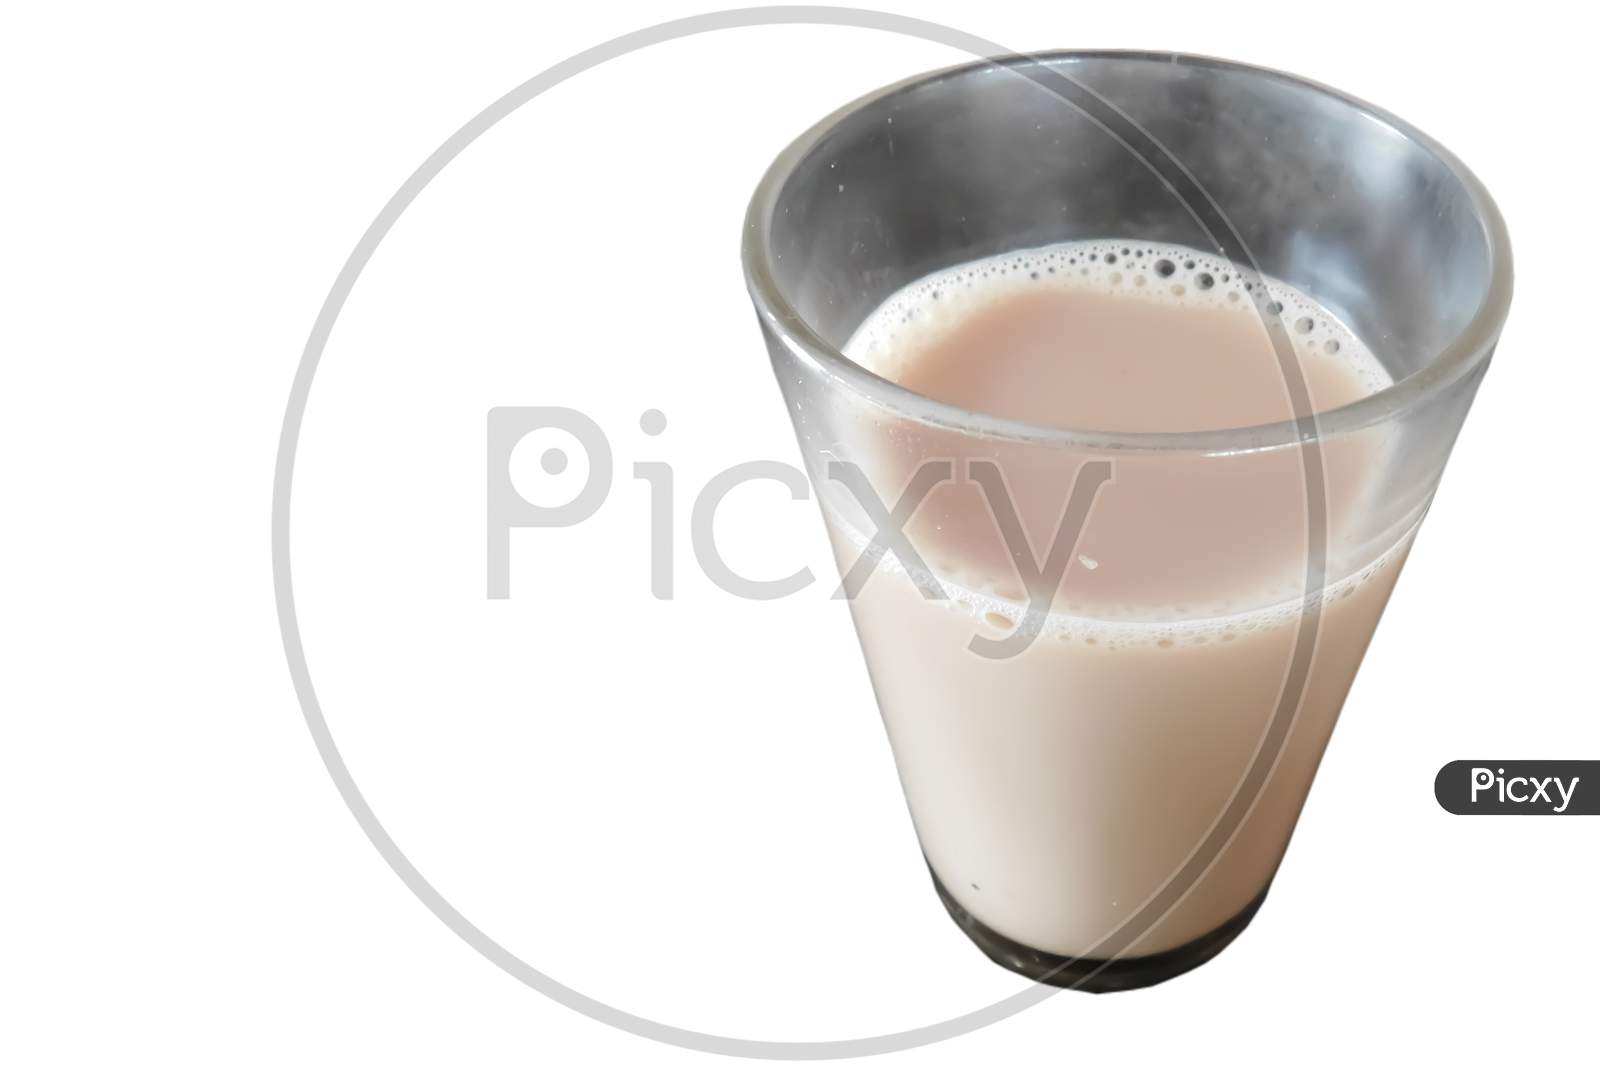 Closeup Of A Drinking Glass With Tea Isolated On White Background